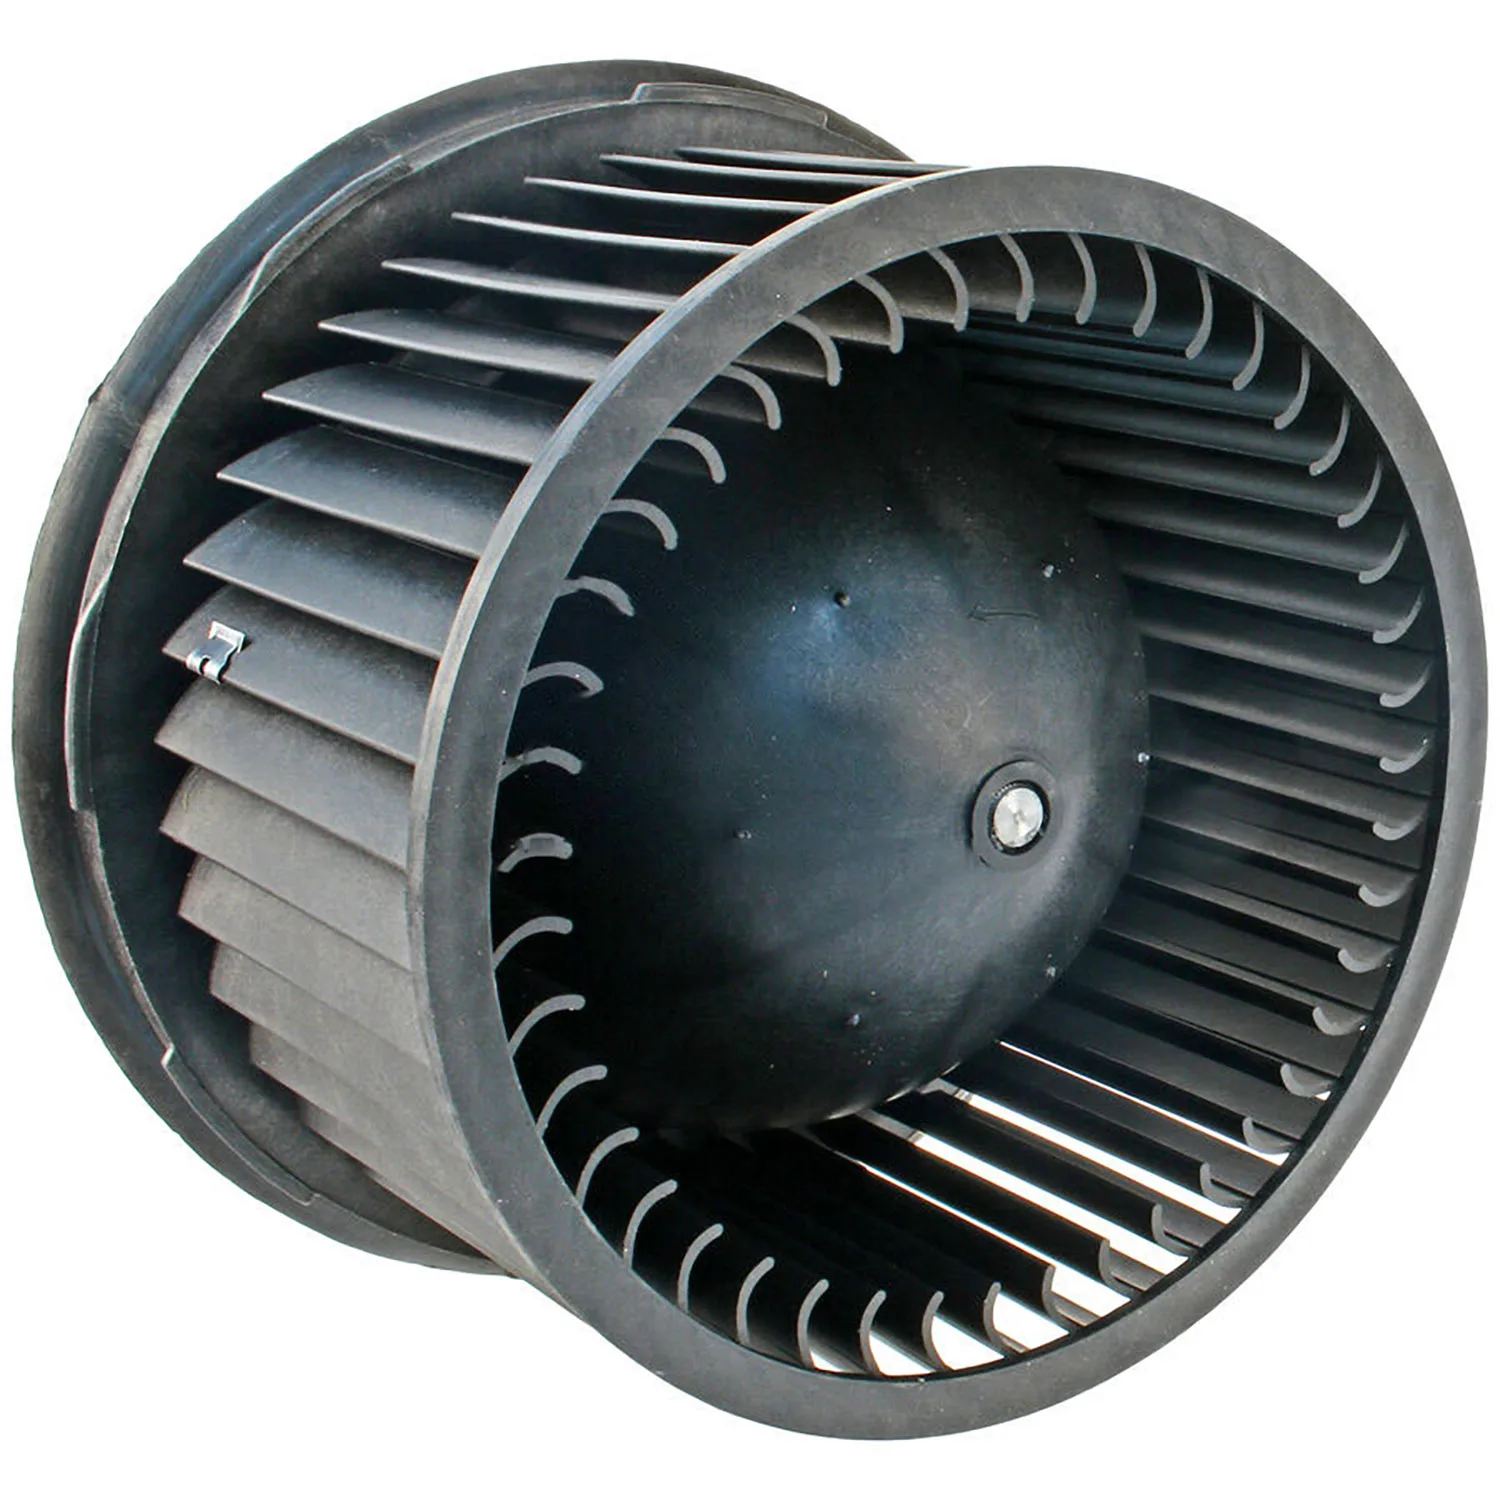 

Air Conditioning Fan AC A/C Blower Motor FOR ISZ 12V MZZ0253 F00S330061 F00S3B2381 971133S000